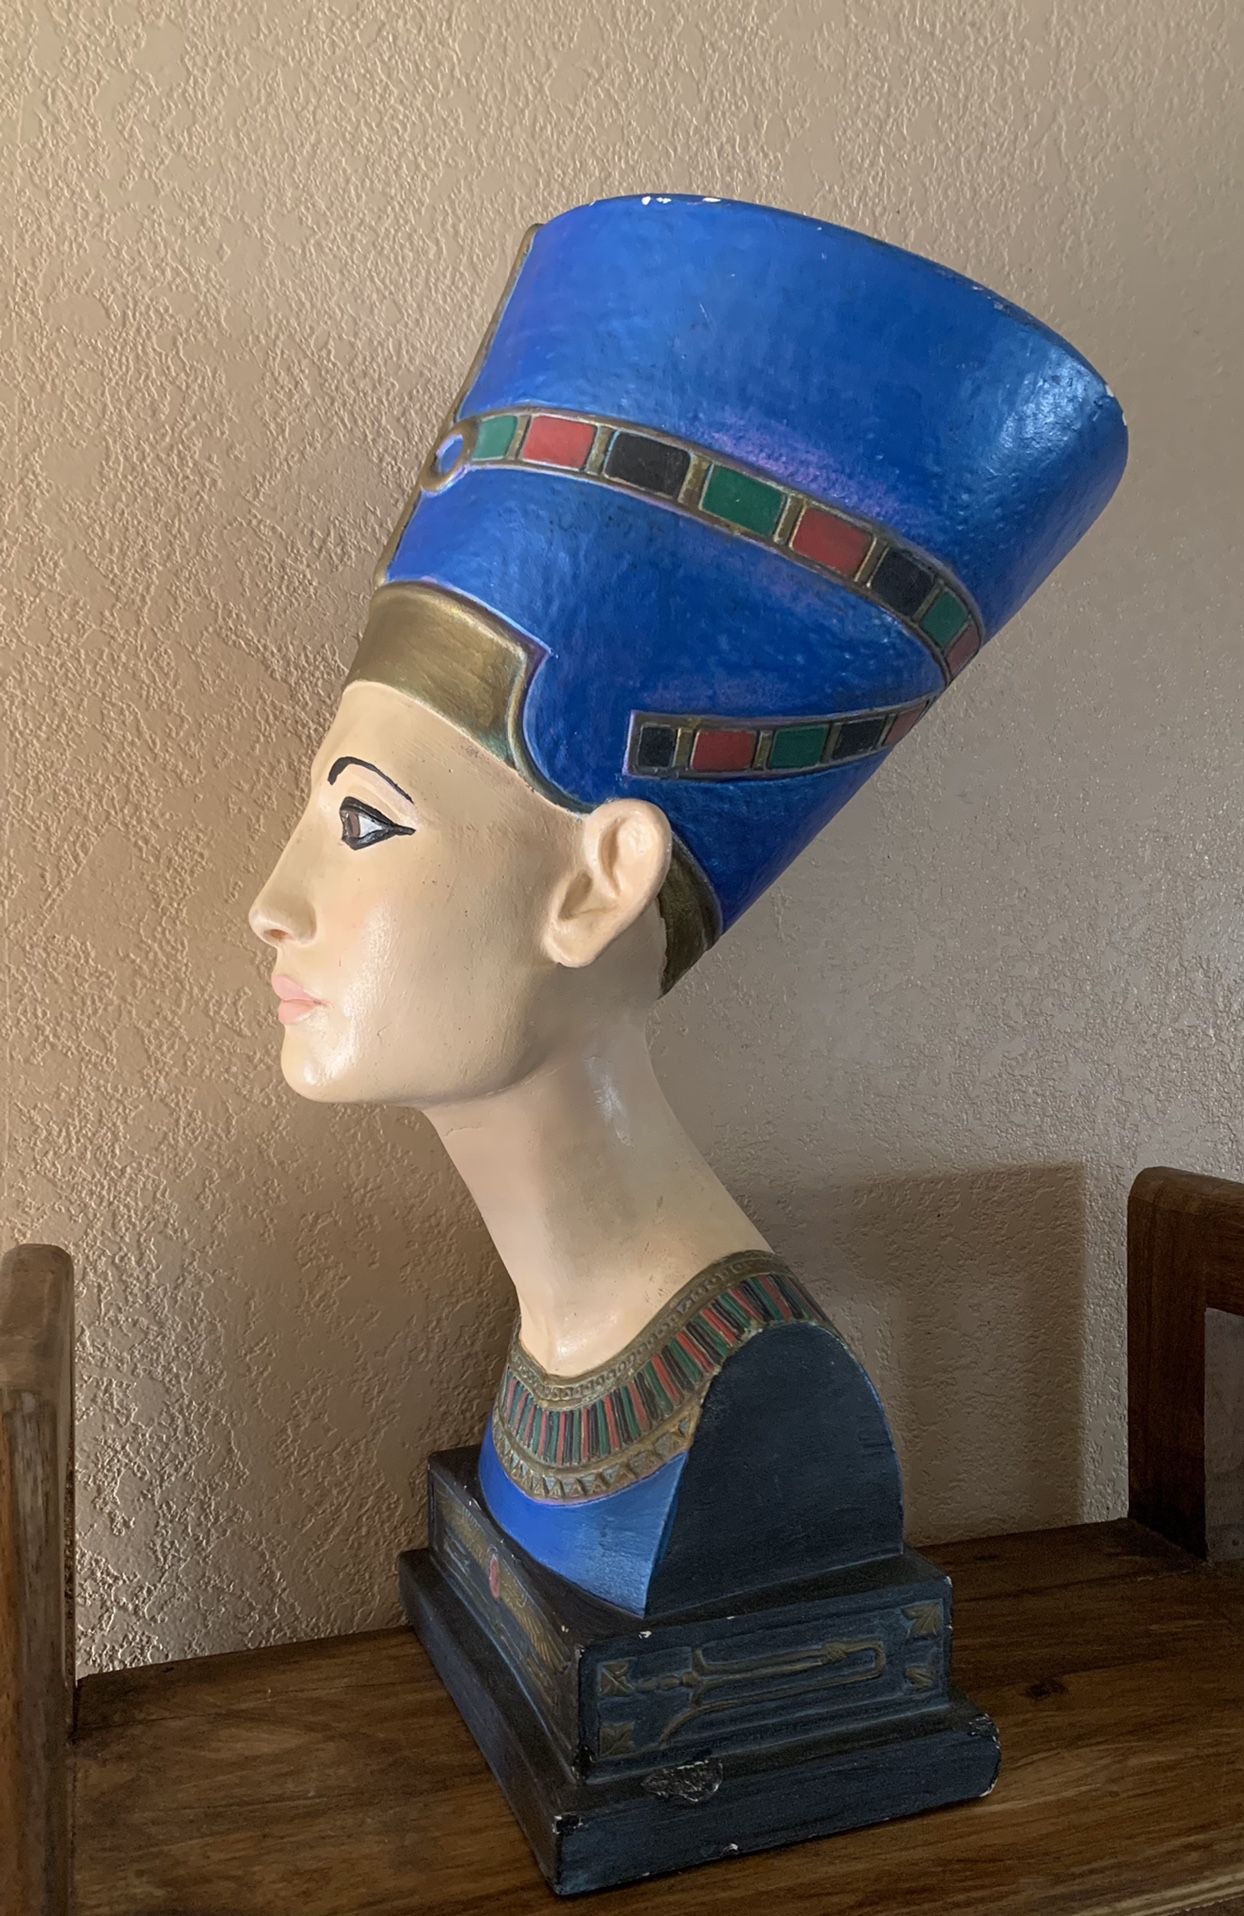 20” Egyptian Queen Nefertiti Head and Bust Resin Statue Figurine